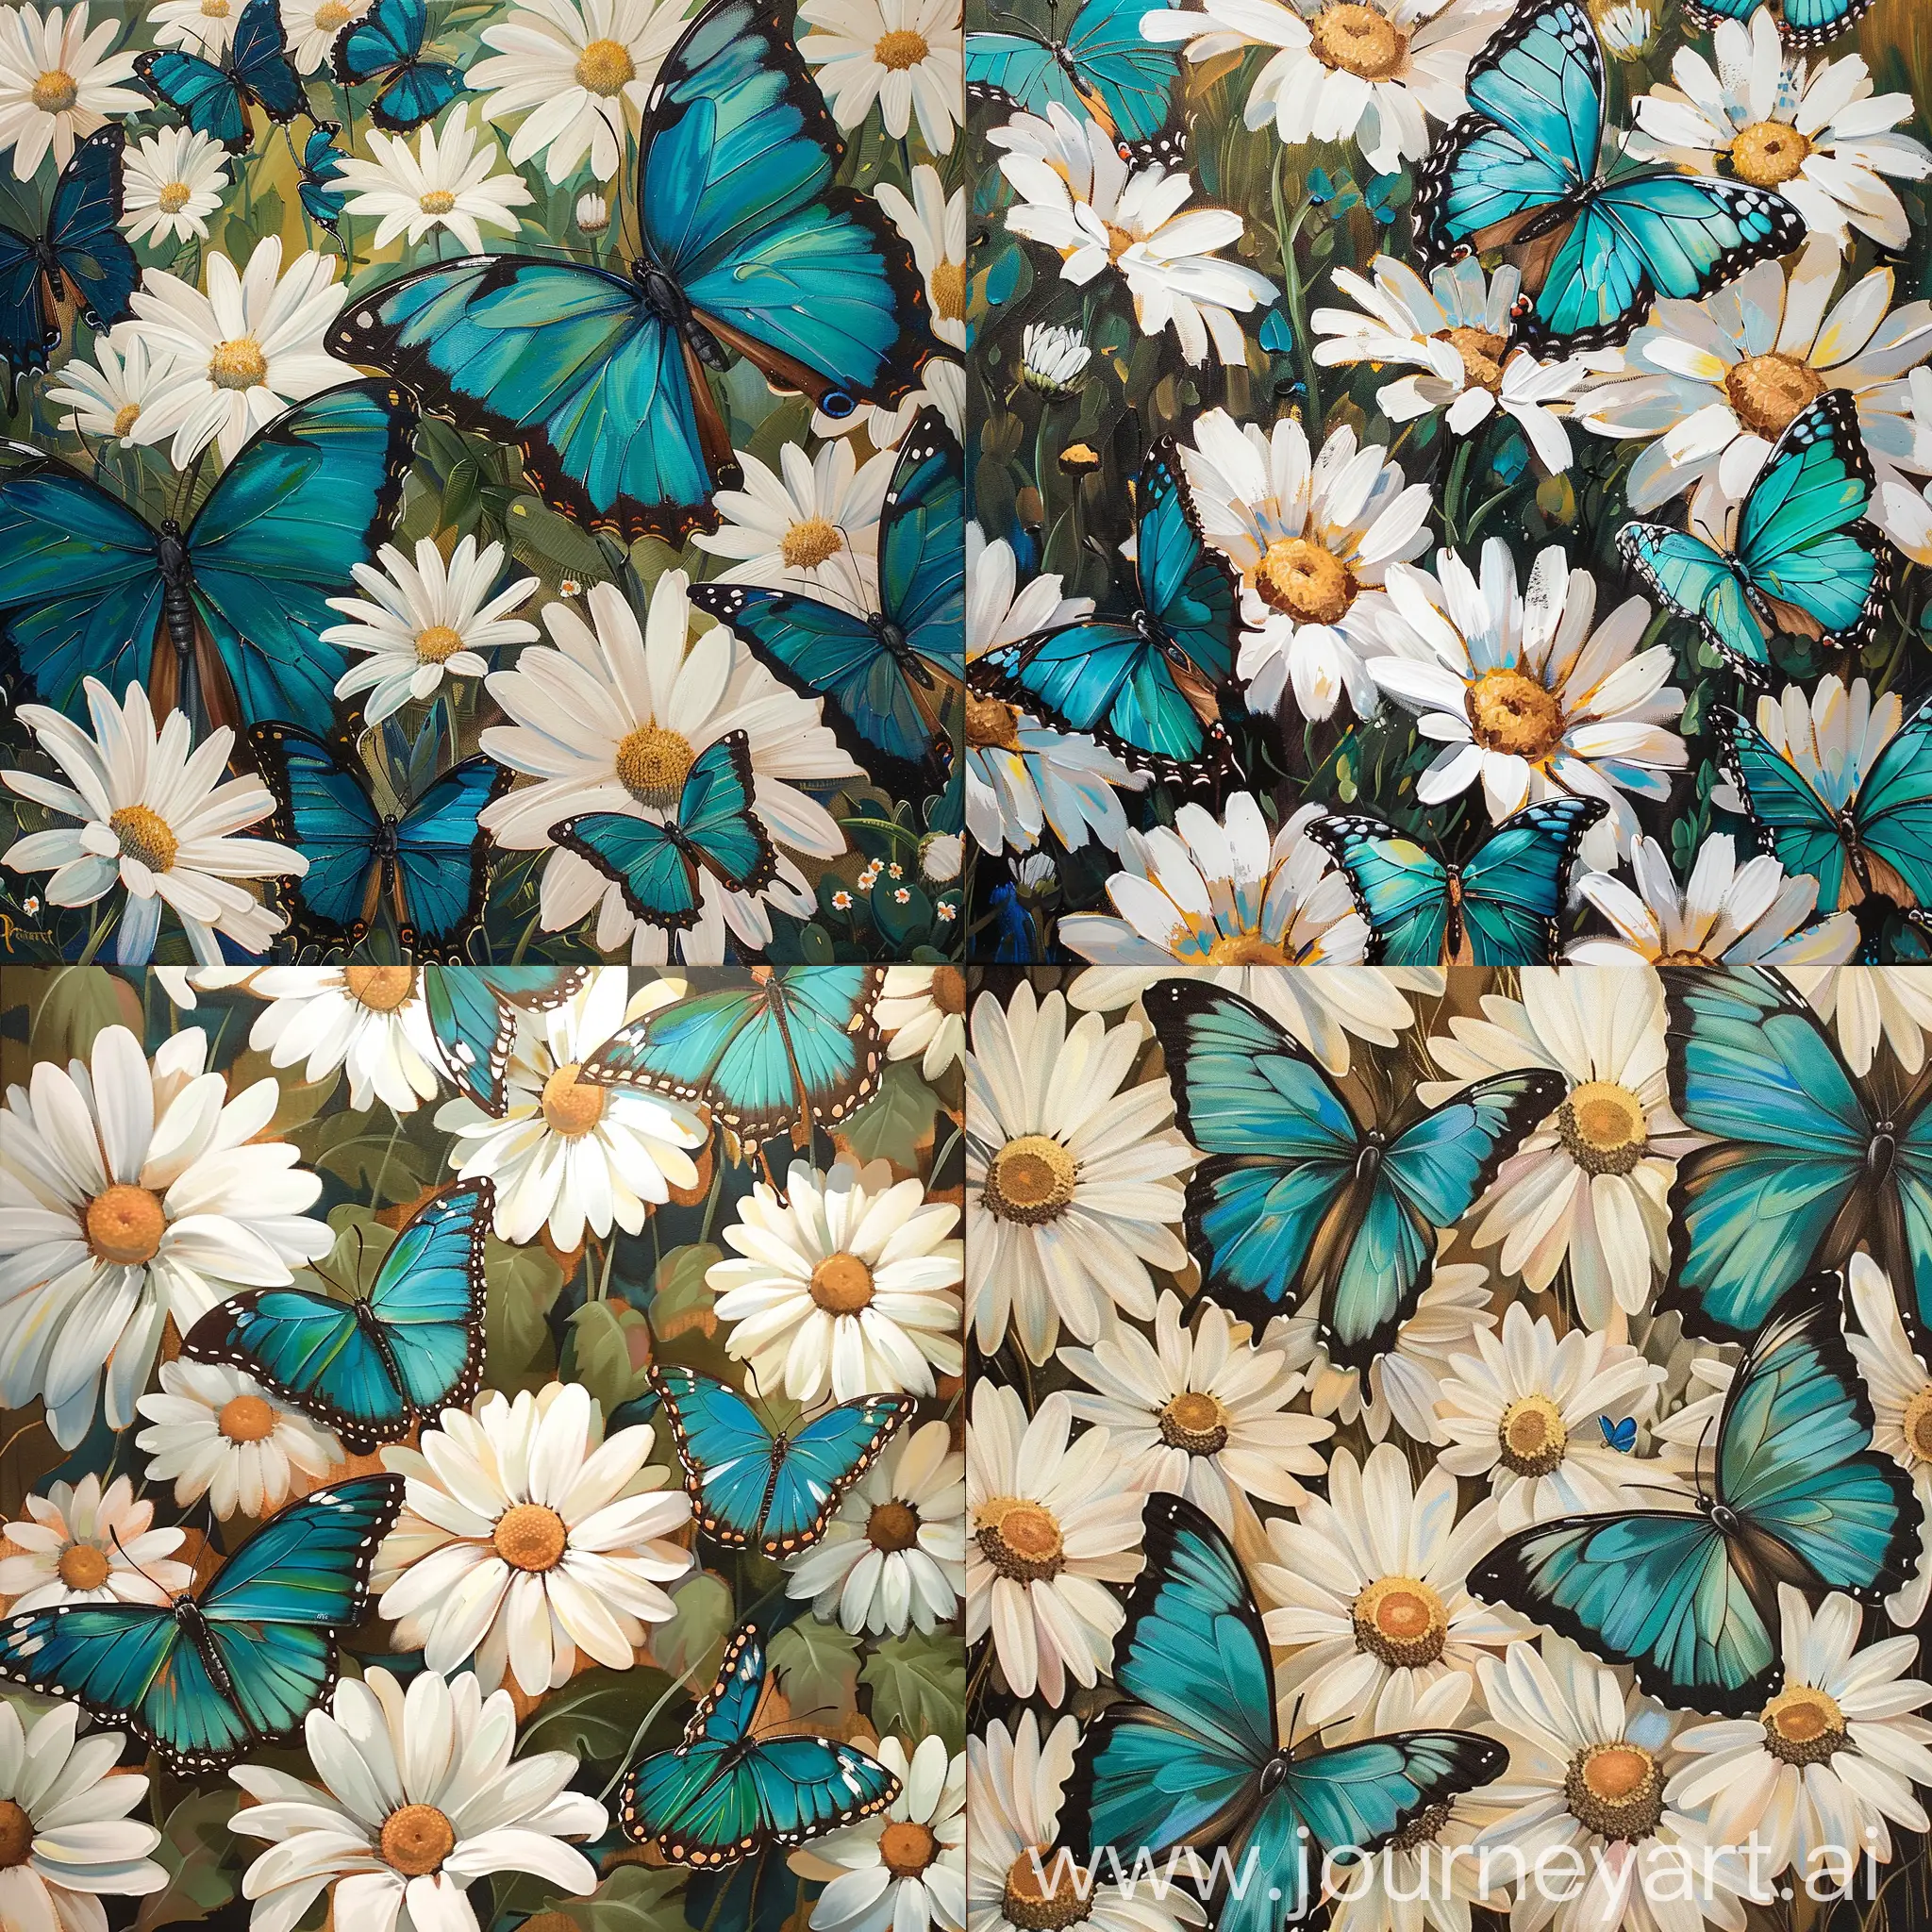 Turquoise-Butterflies-Dancing-Among-White-Daisies